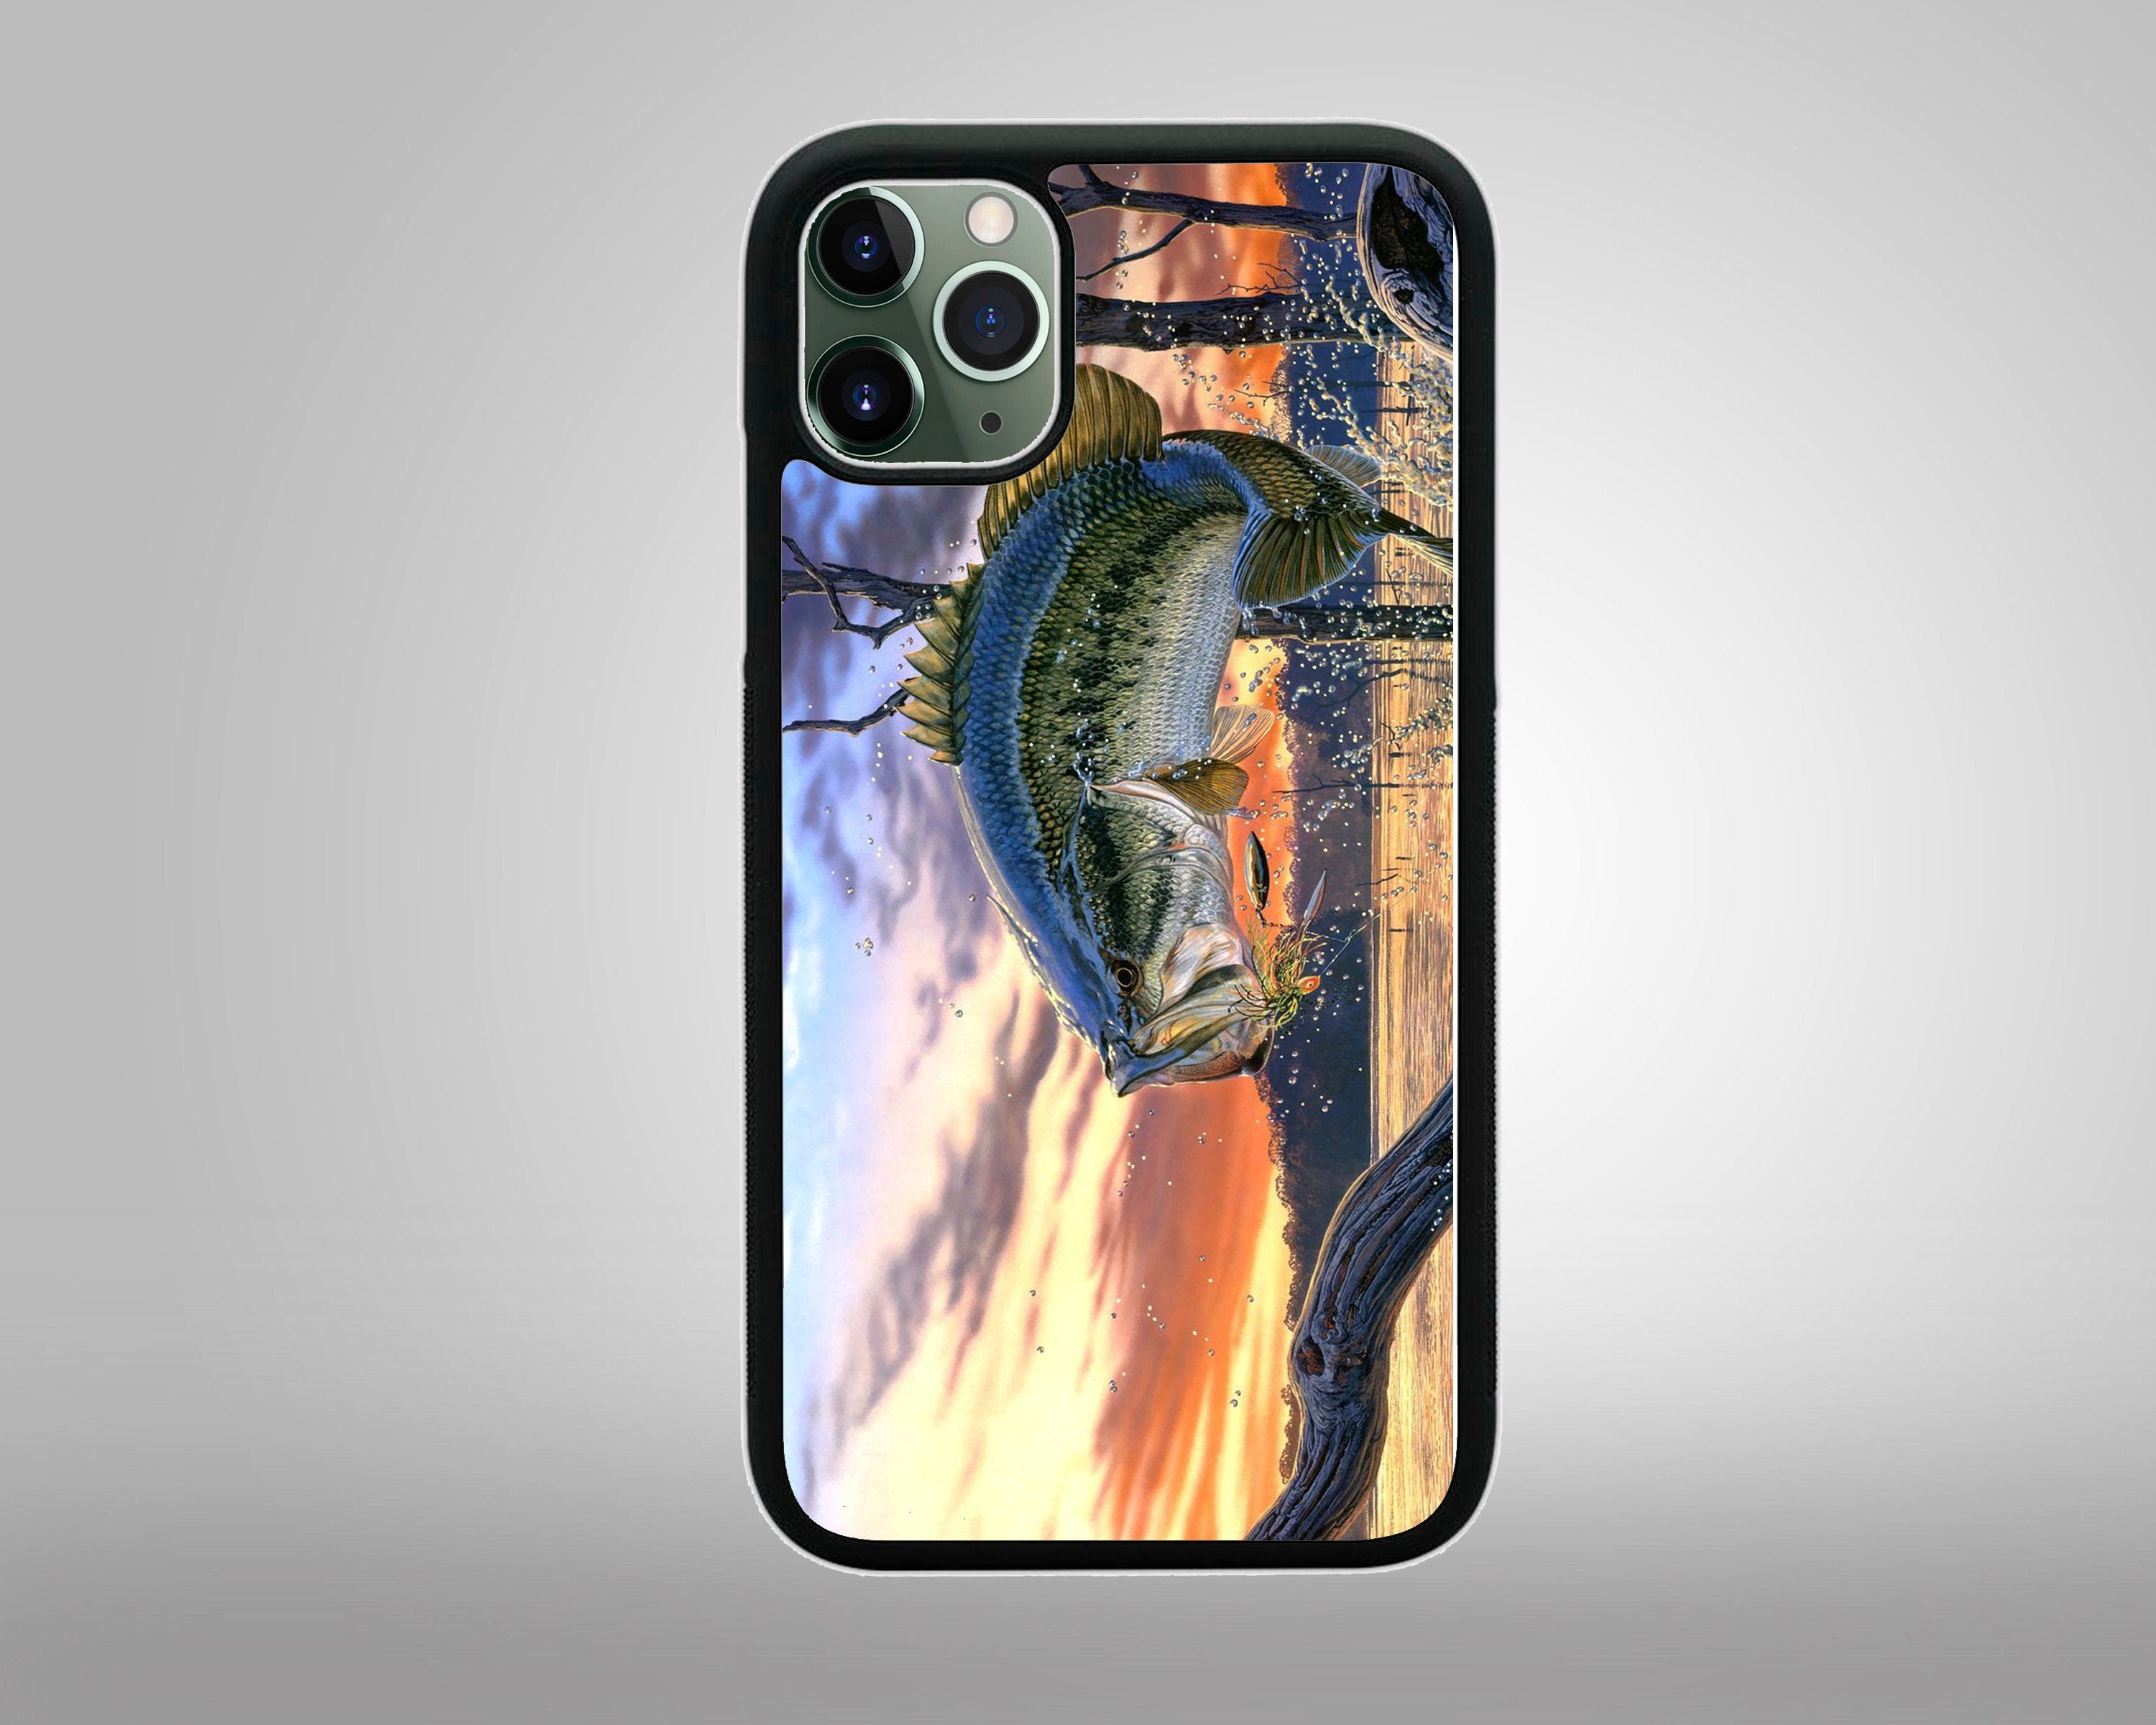 Bass Fishing iPhone 12 Pro Max Case - casemighty